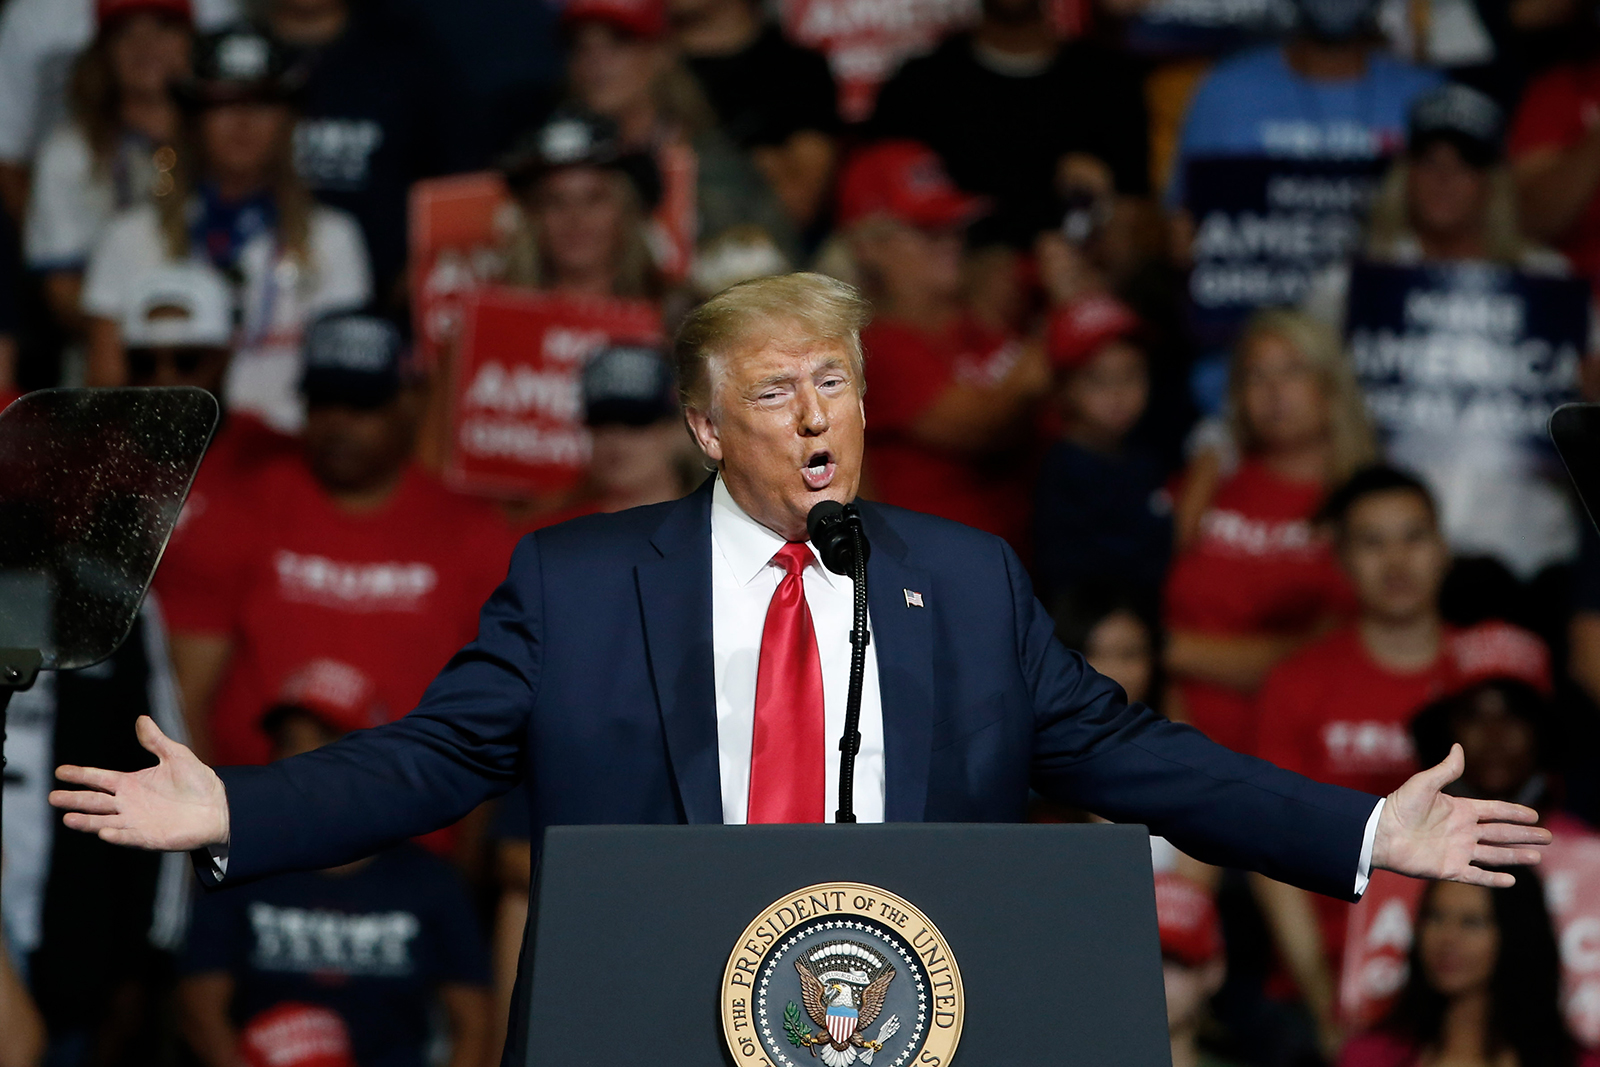 US President Donald Trump speaks at a campaign rally in Tulsa, Oklahoma on Saturday (June 20th).